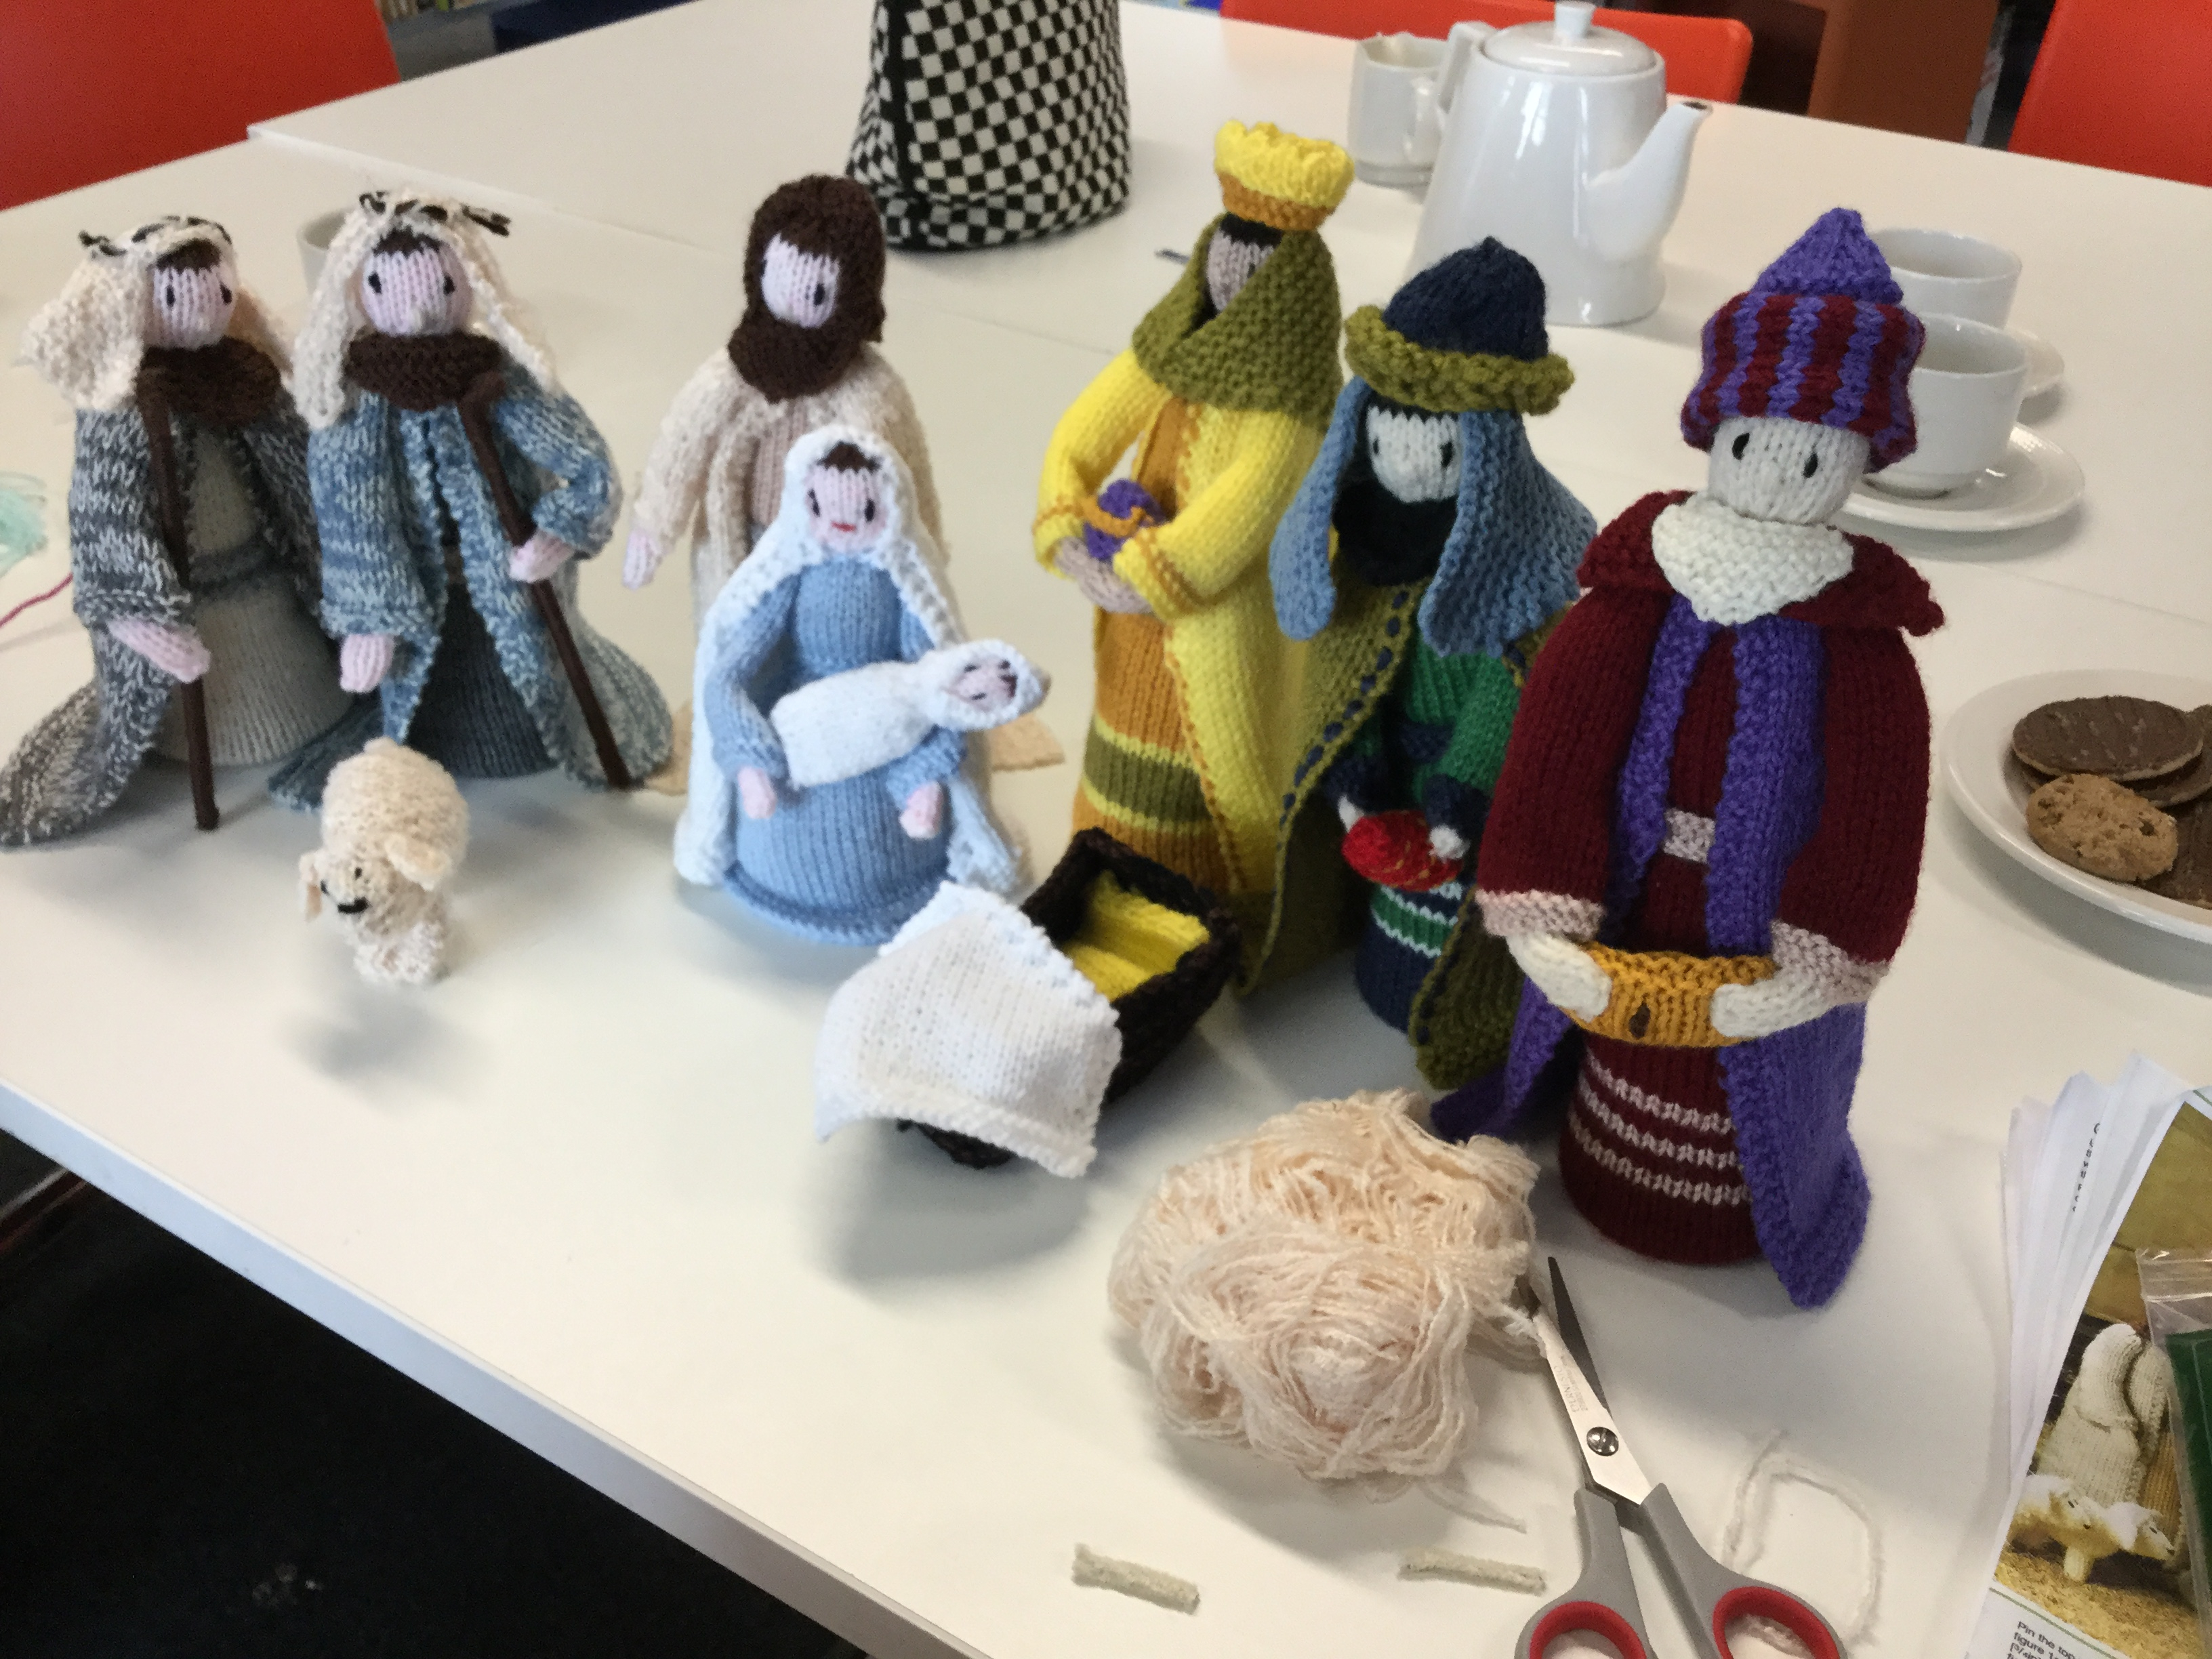 Nativity Knitting Pattern Free Castlewellan Library Invites You To Knit And Natter On Tuesday 4